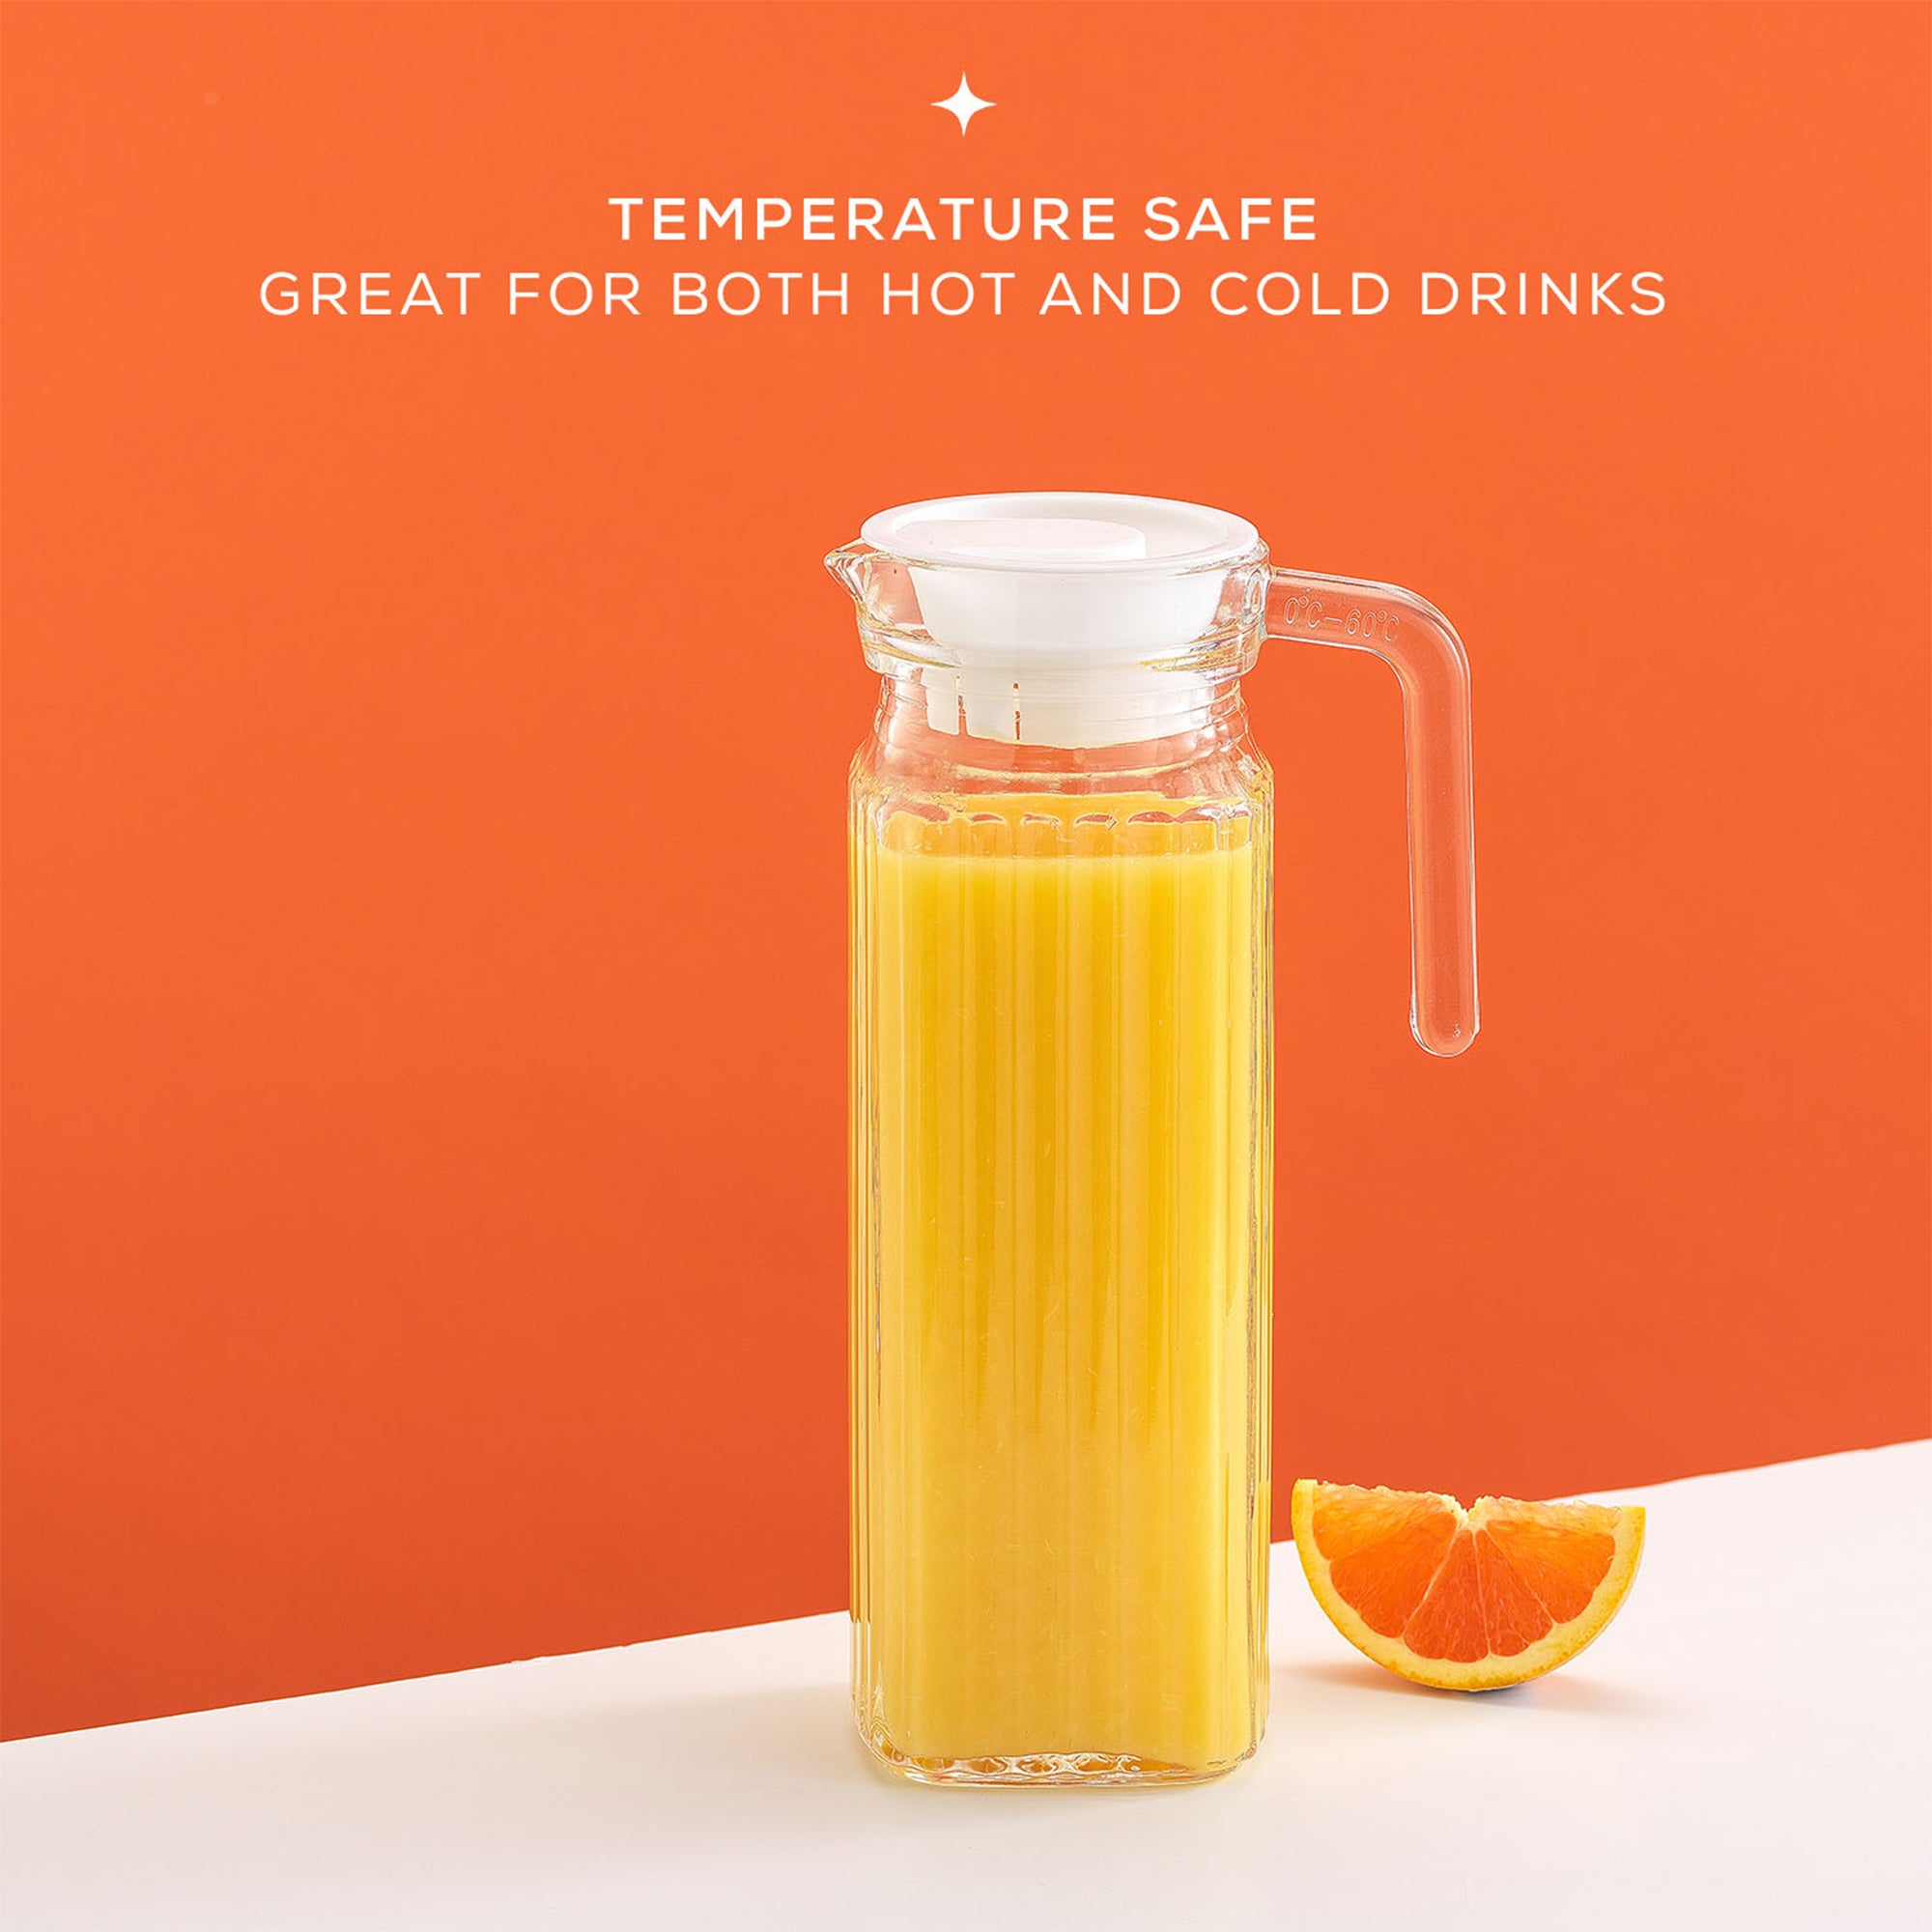 A large, clear glass pitcher filled with orange juice sits on a table next to a single orange. The pitcher has a sleek, fluted design and a lid. Text on the image reads “TEMPERATURE SAFE. GREAT FOR BOTH HOT AND COLD DRINKS”. This is a JoyJolt Beverage Serveware Glass Pitcher, 40oz.